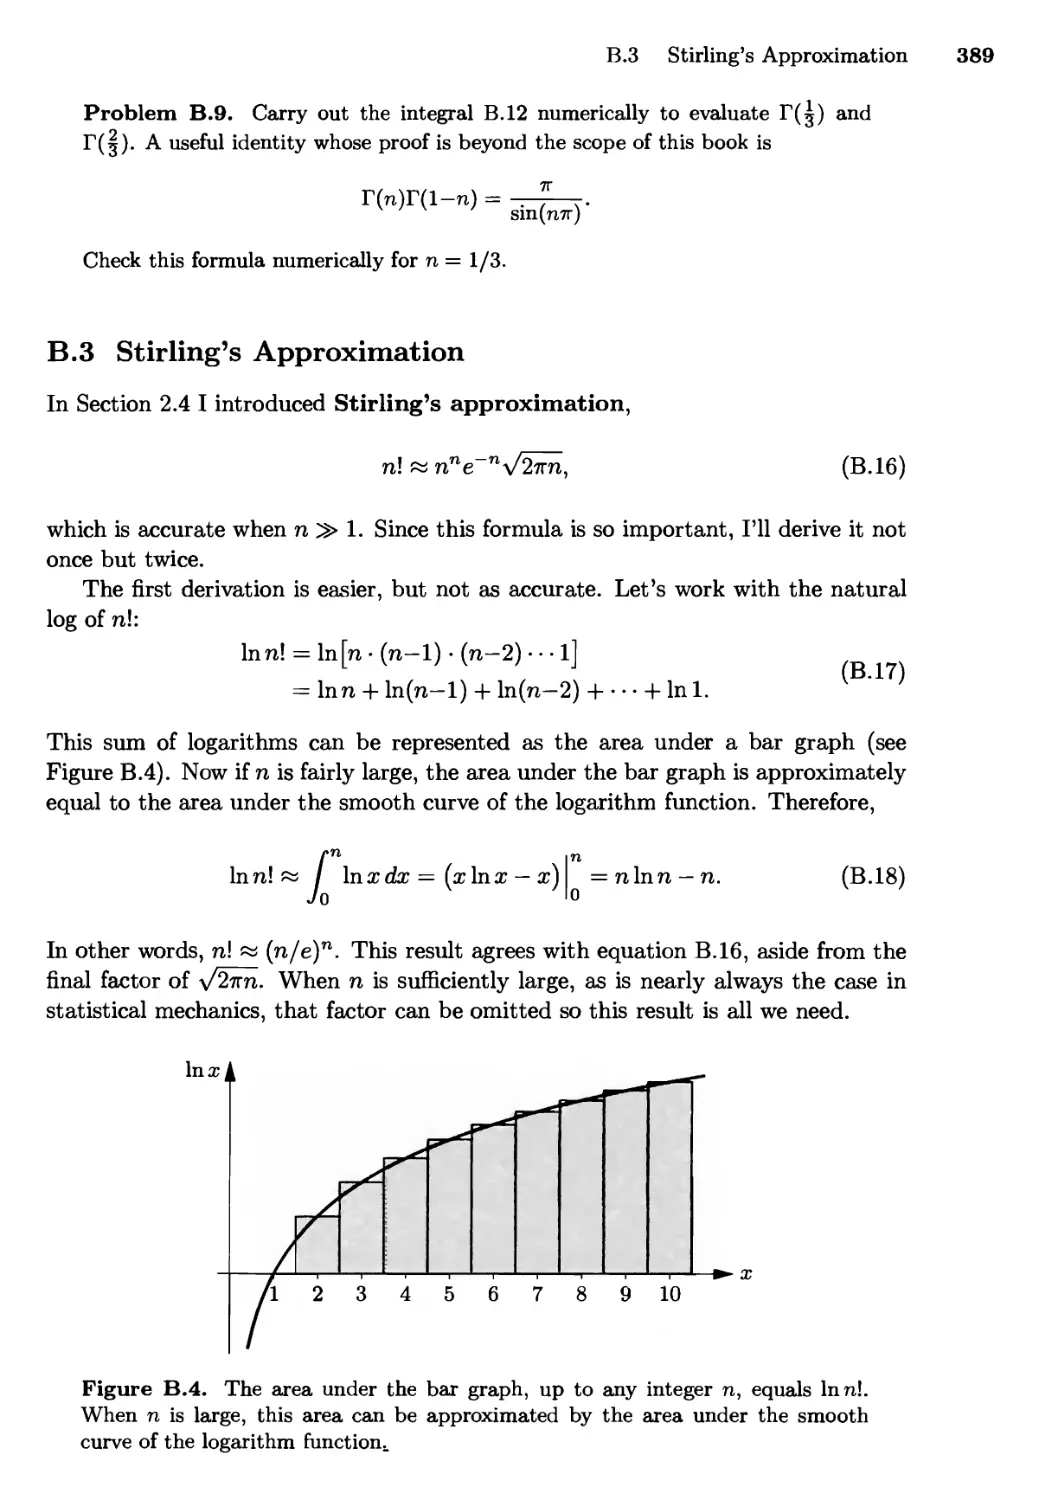 B.3 Stirling's Approximation